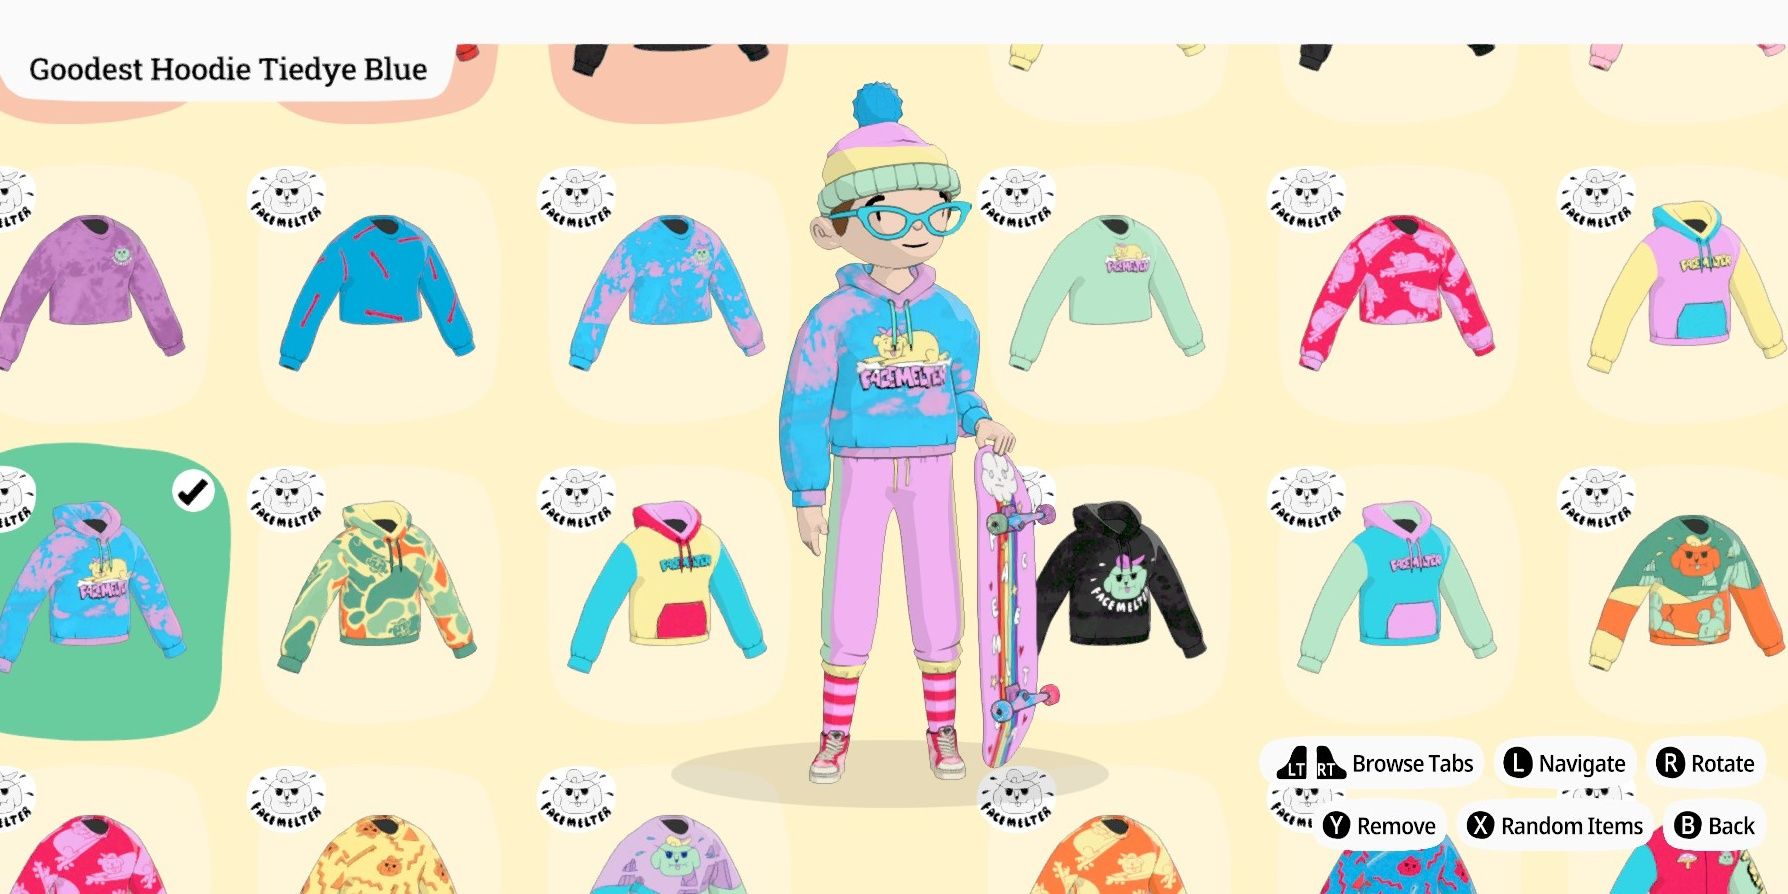 A wide variety of long-sleeved shirts for the player in OlliOlli World